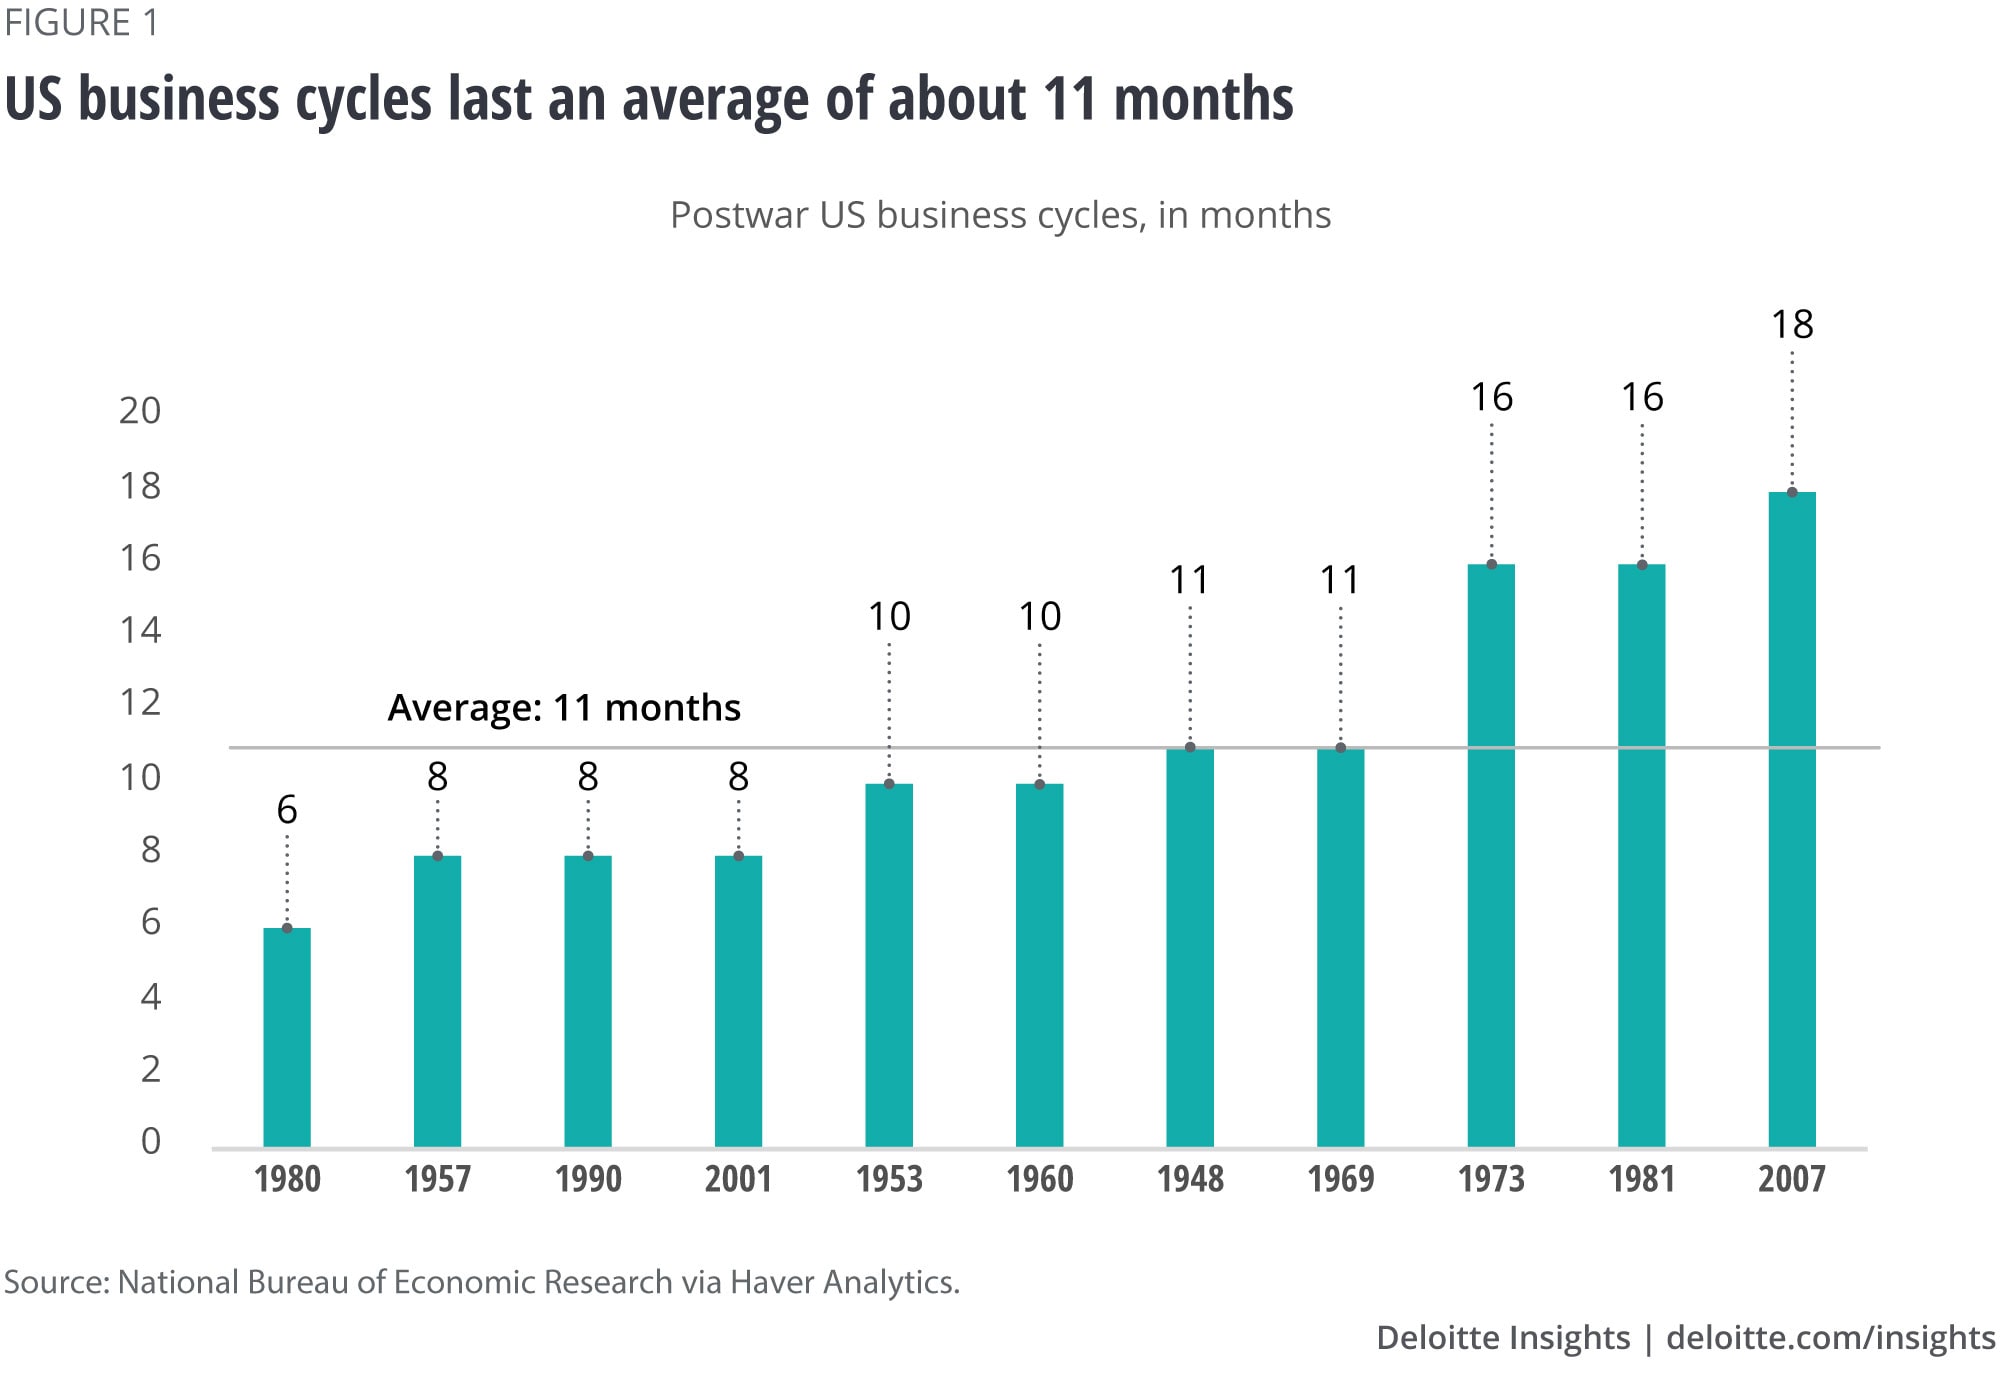 US business cycles last an average of about 11 months